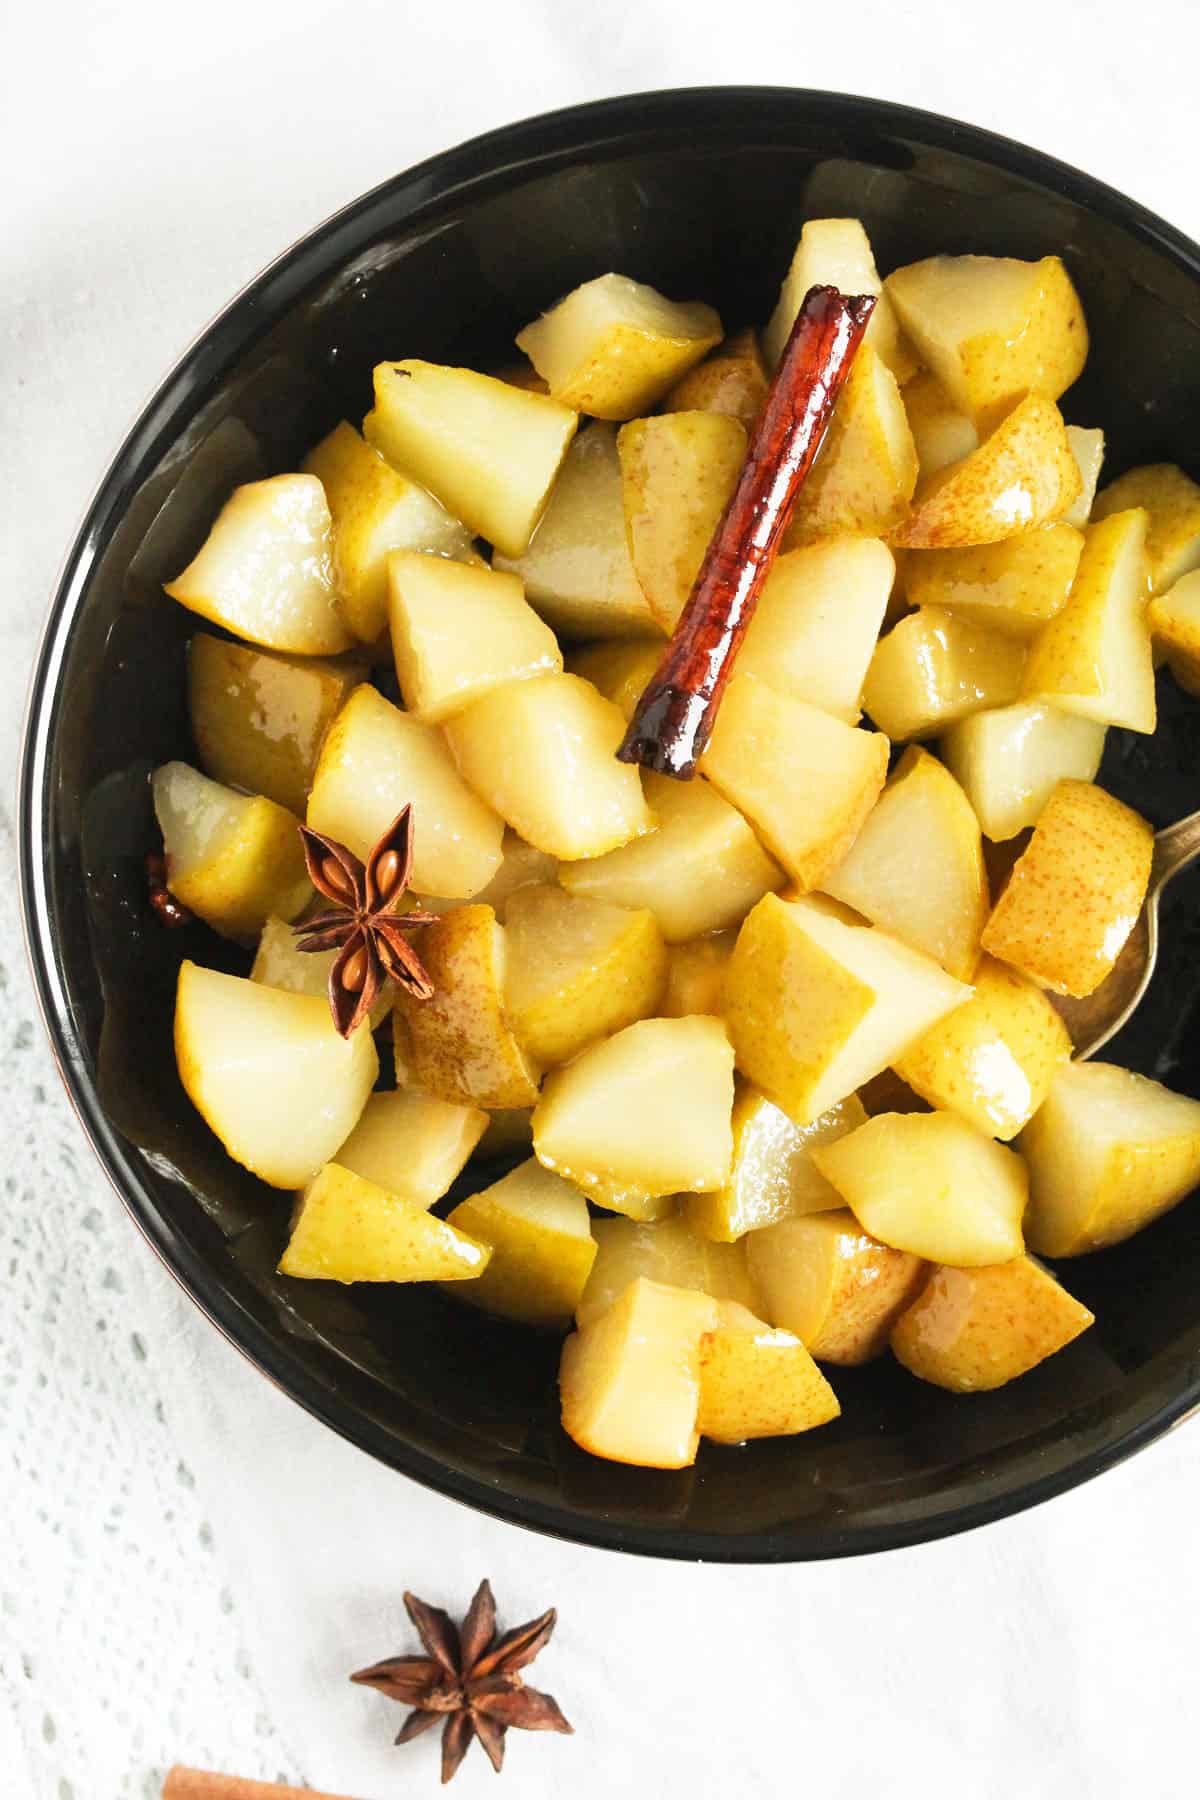 cubes pears poached with spices in a black bowl.